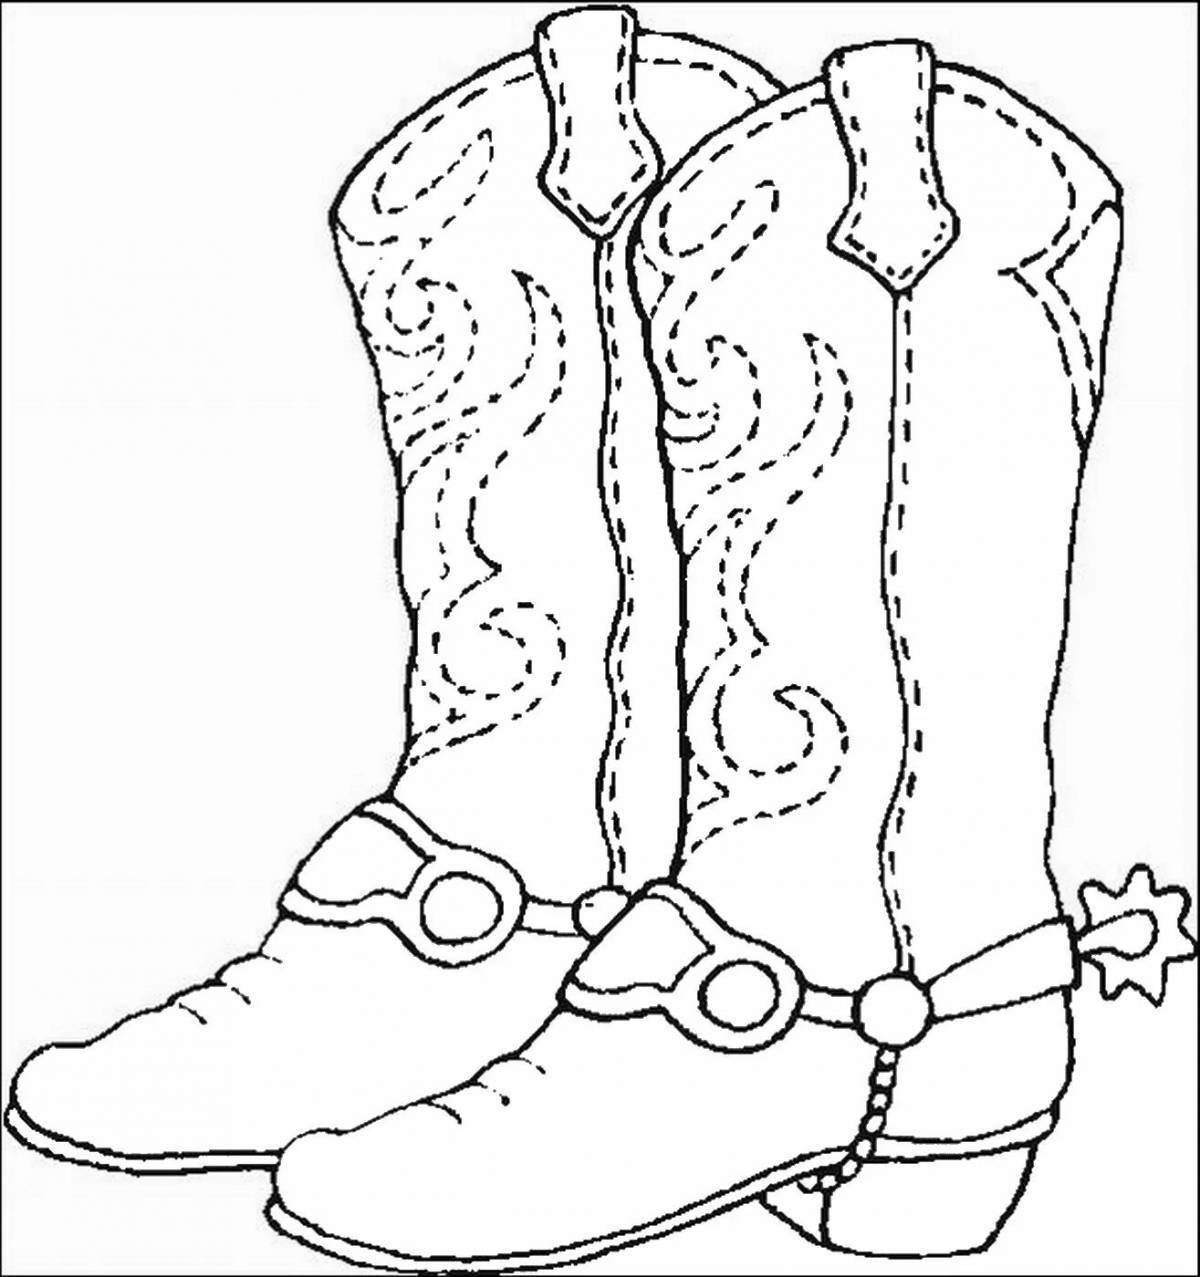 Coloring book bold walking boots